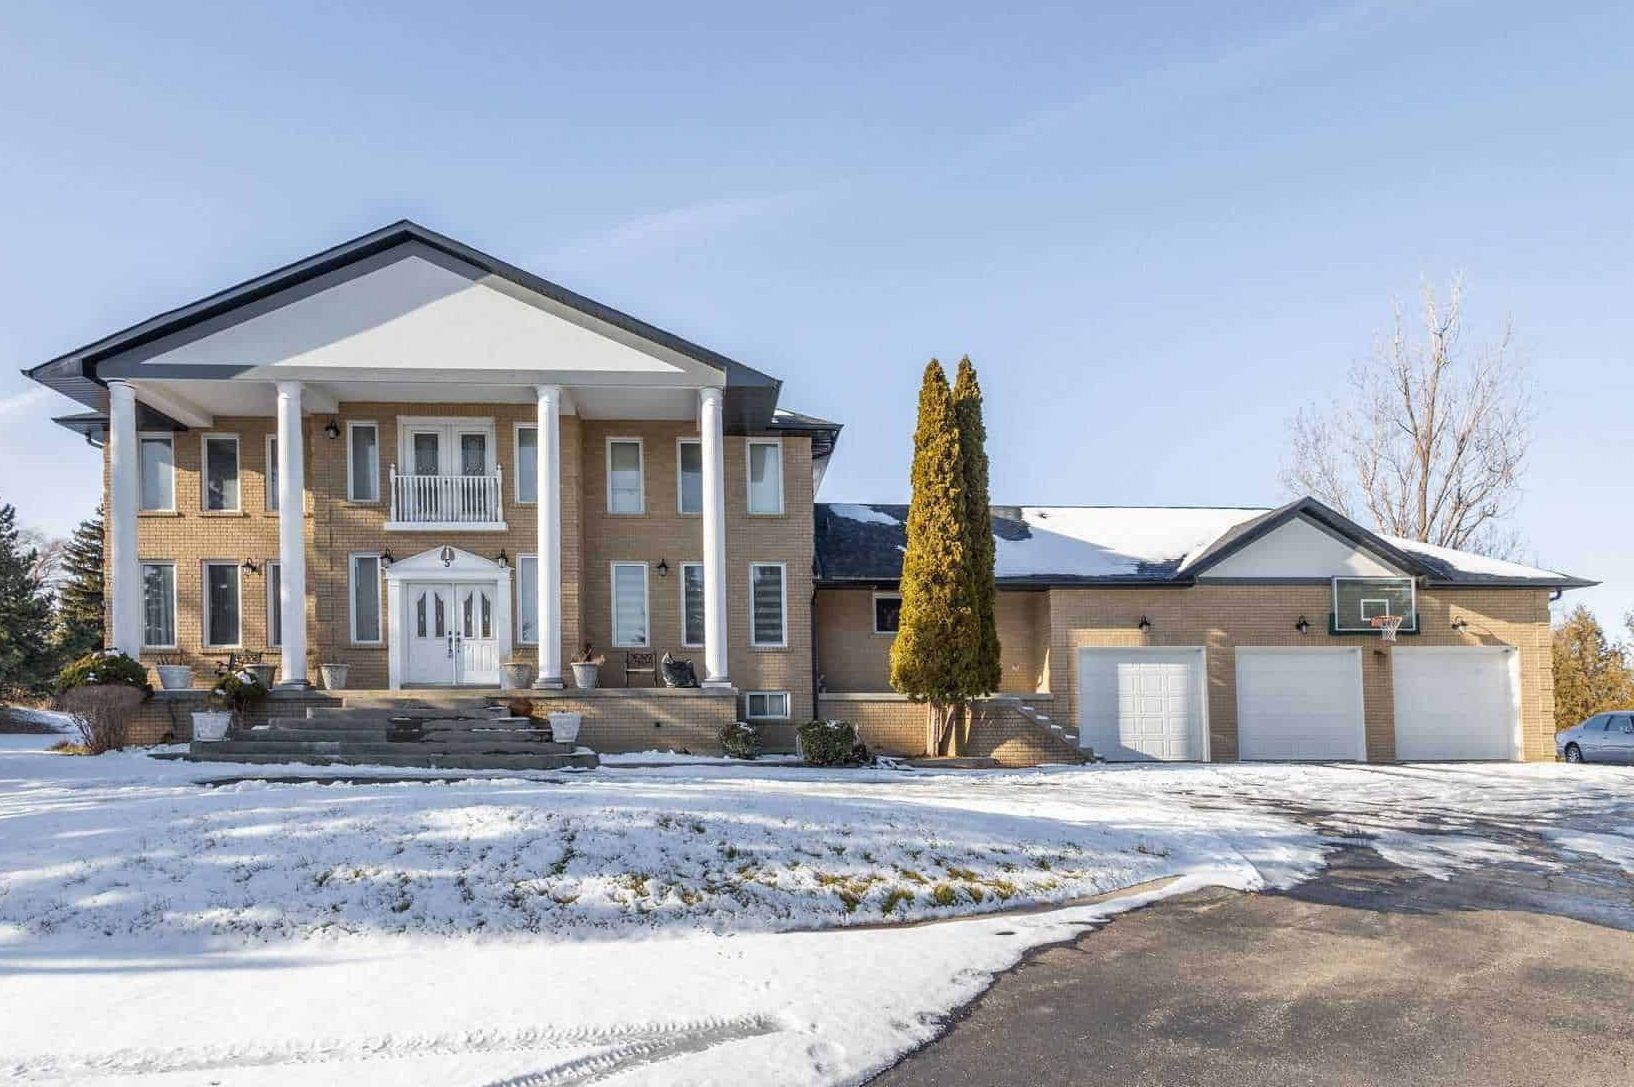 Brampton Home of the Week: Up-scale mansion with chef’s kitchen